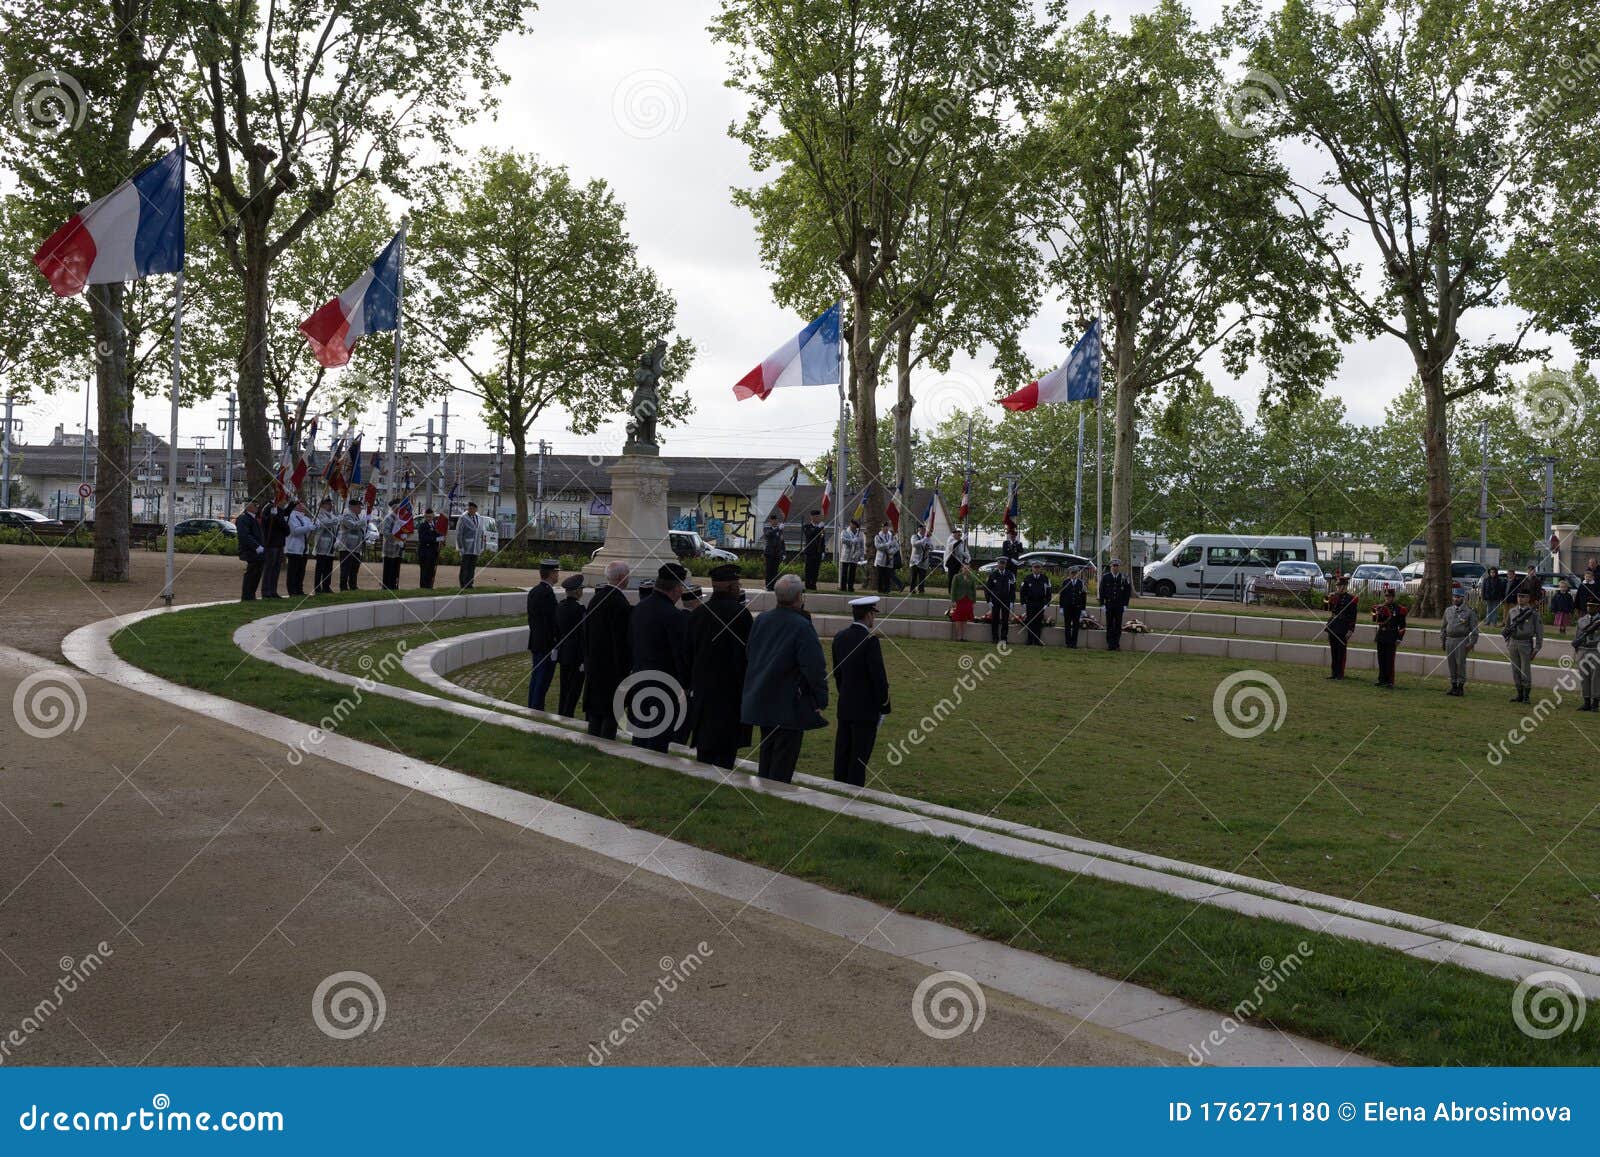 Victory Day in France, Ceremony, Anniversary, Military Parade Editorial